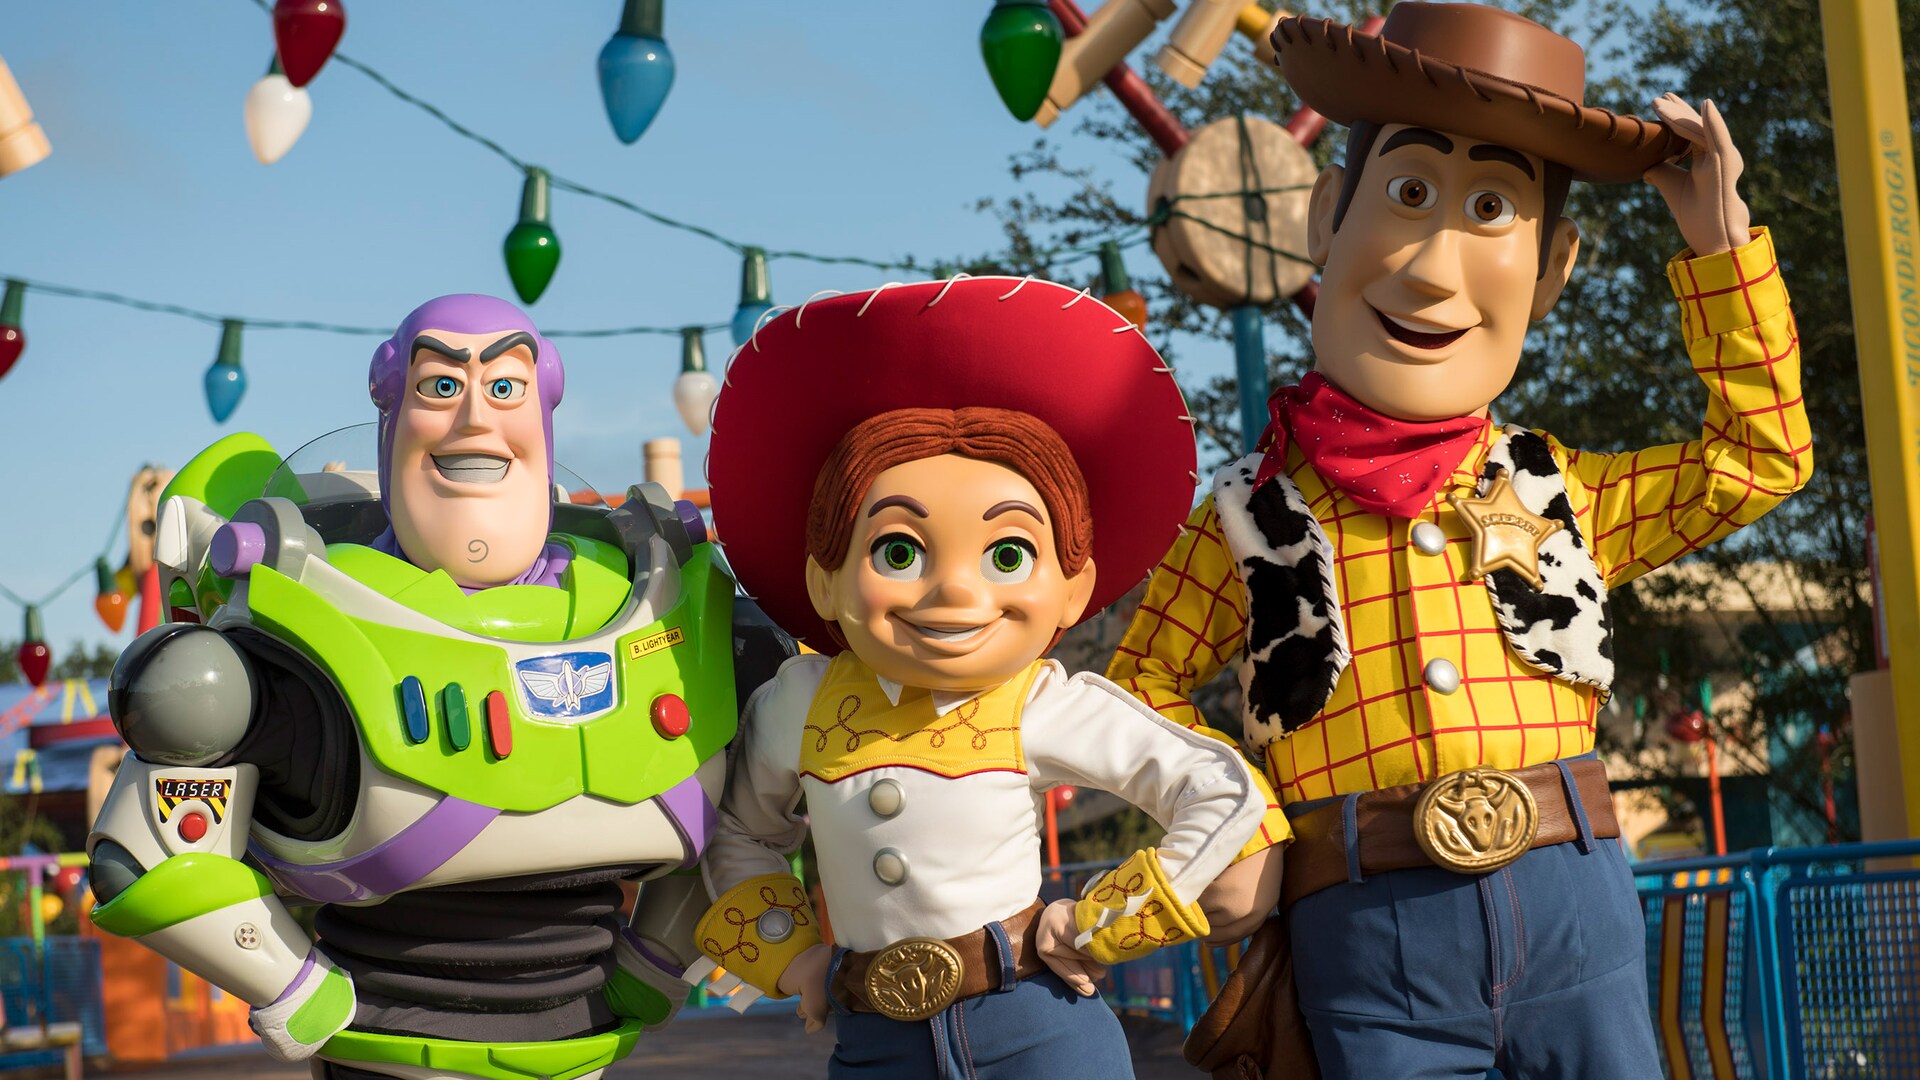 Buzz Lightyear, Jessie and Woody stand together on the streets of Toy Story...